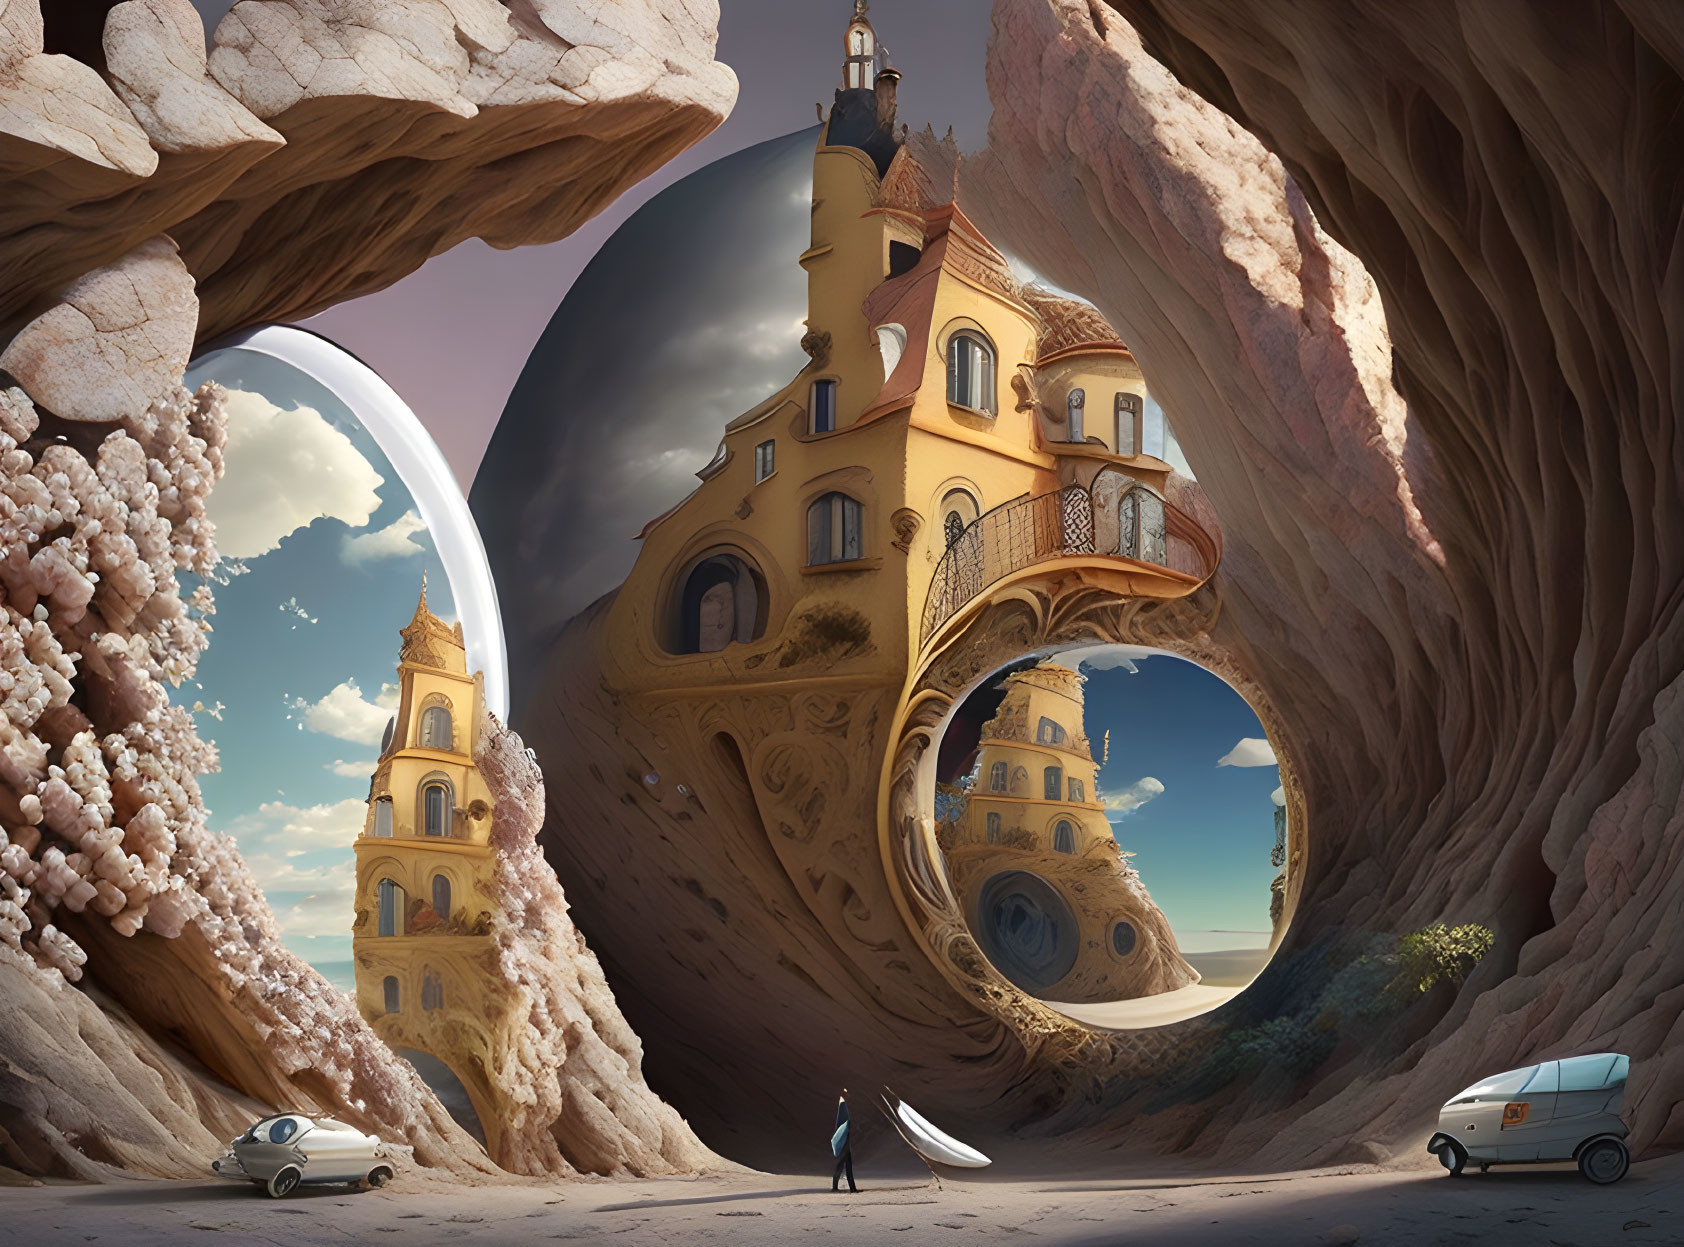 Surreal landscape with circular portal, reflective sphere, fantastical buildings, vehicles in cavern